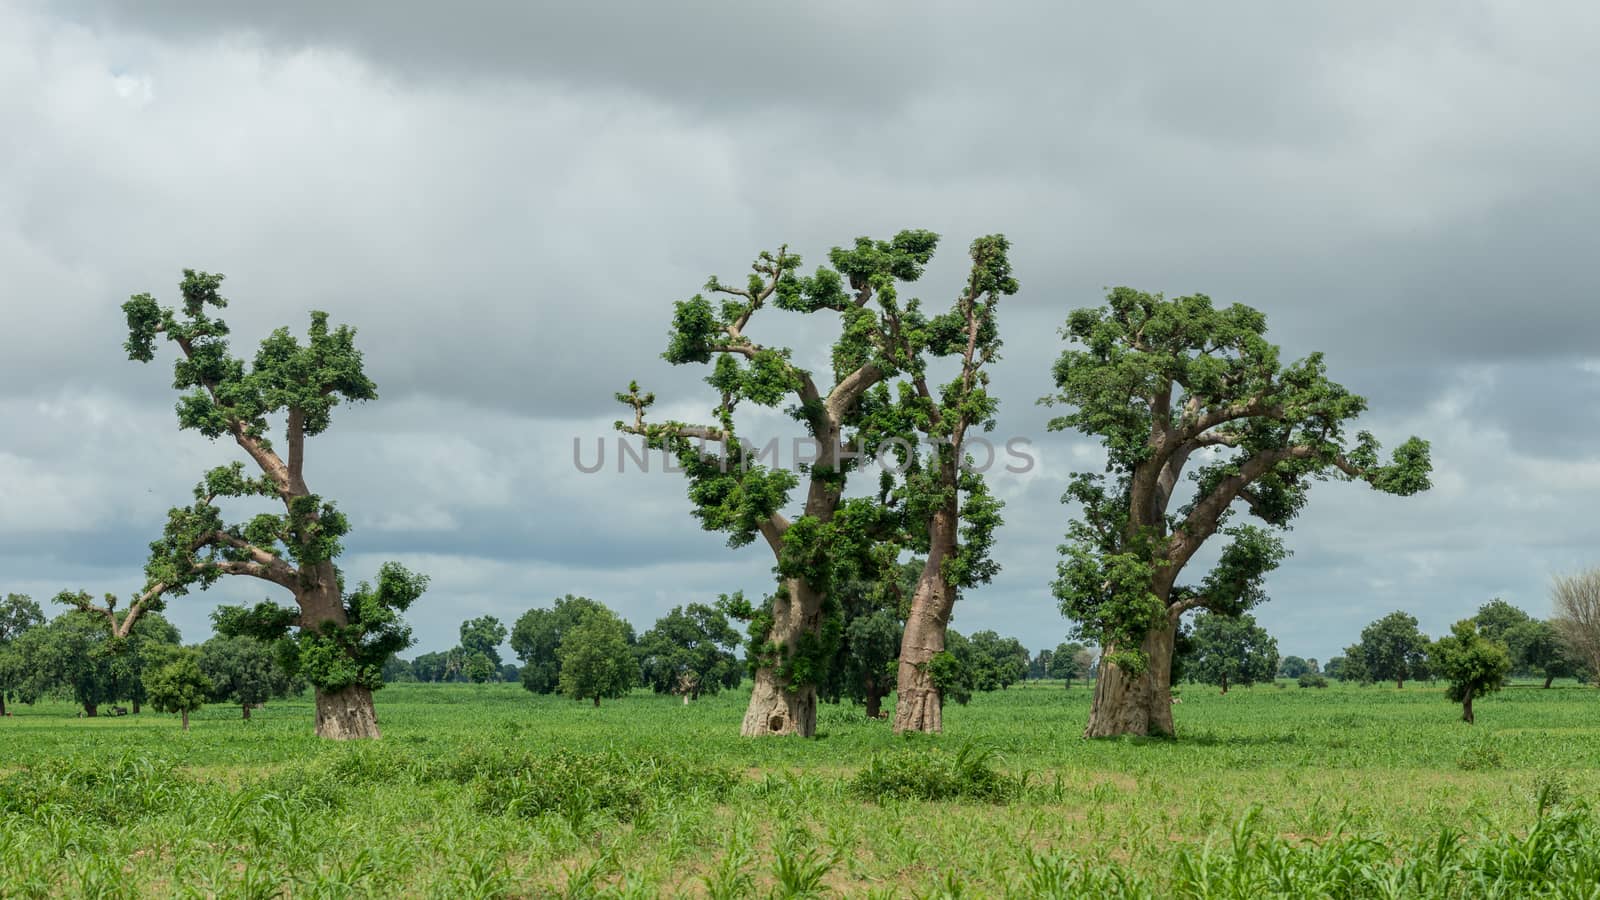 Big Old trees with newly sprouting leaves common in the rural areas of Senegal